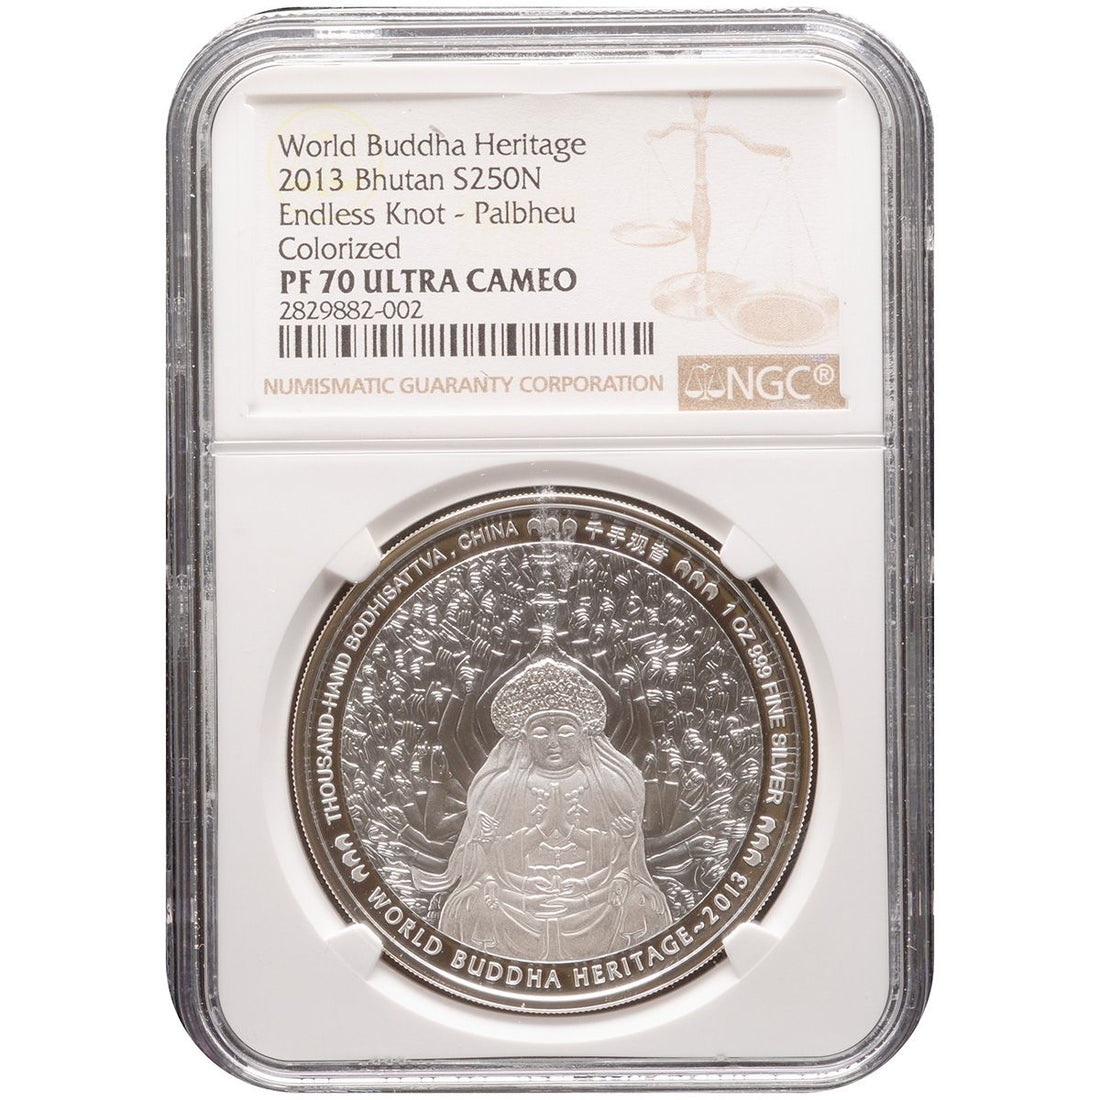 2013 1 oz ENDLESS KNOT Silver Coin PF 70 World Buddha Heritage (Colorized) - OZB